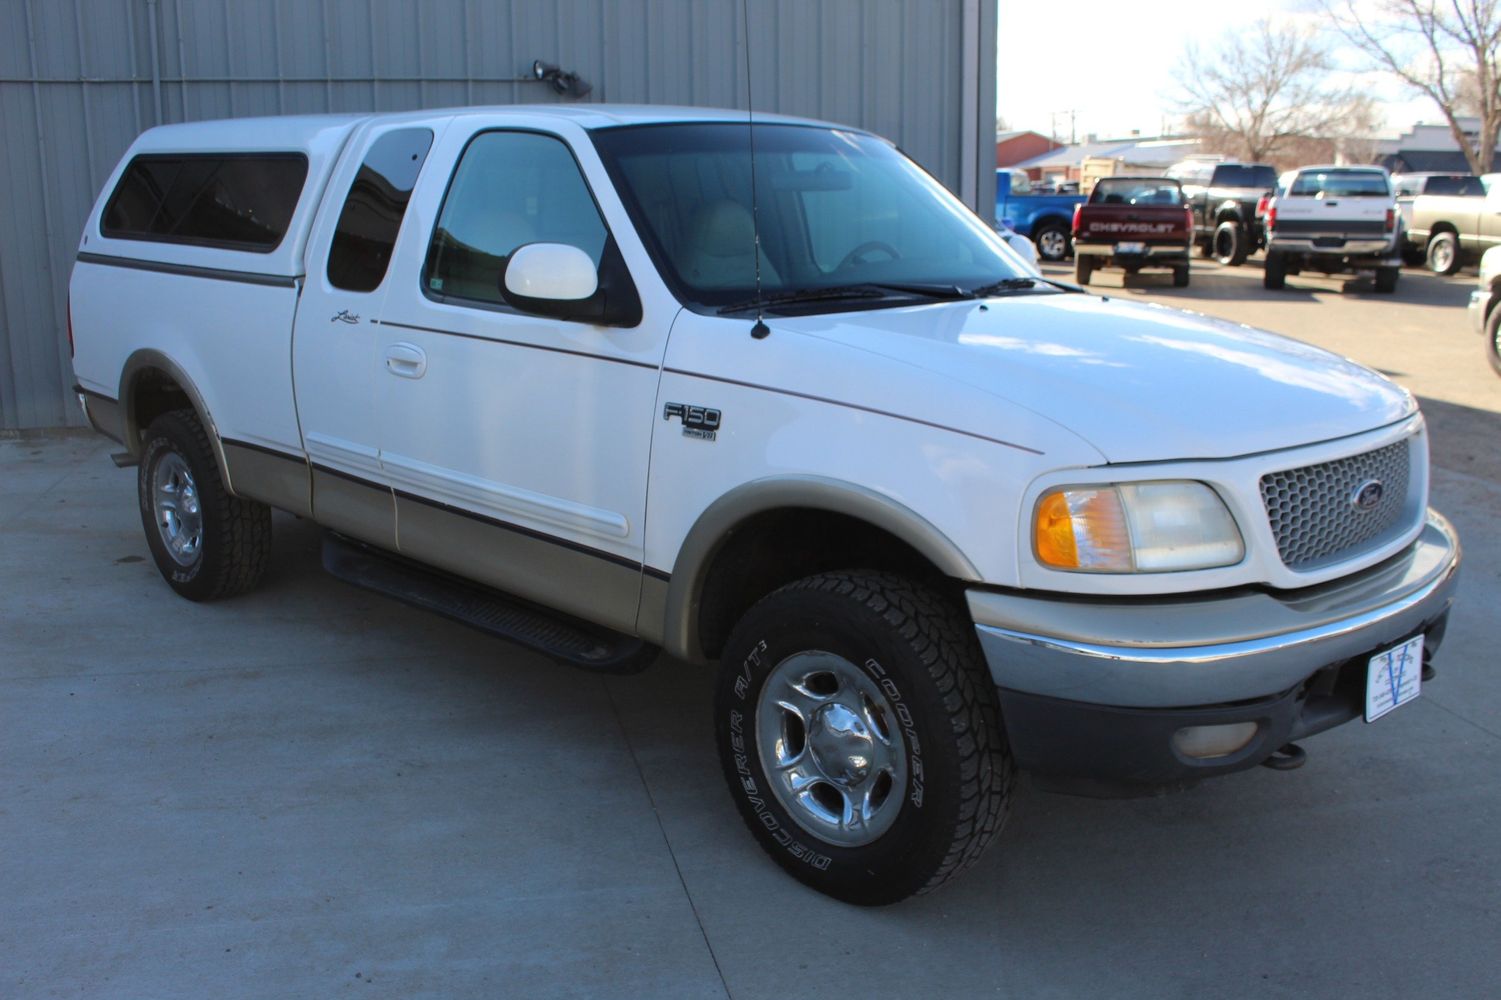 1999 Ford F-150 Lariat | Victory Motors of Colorado 1999 Ford F150 4.6 Towing Capacity